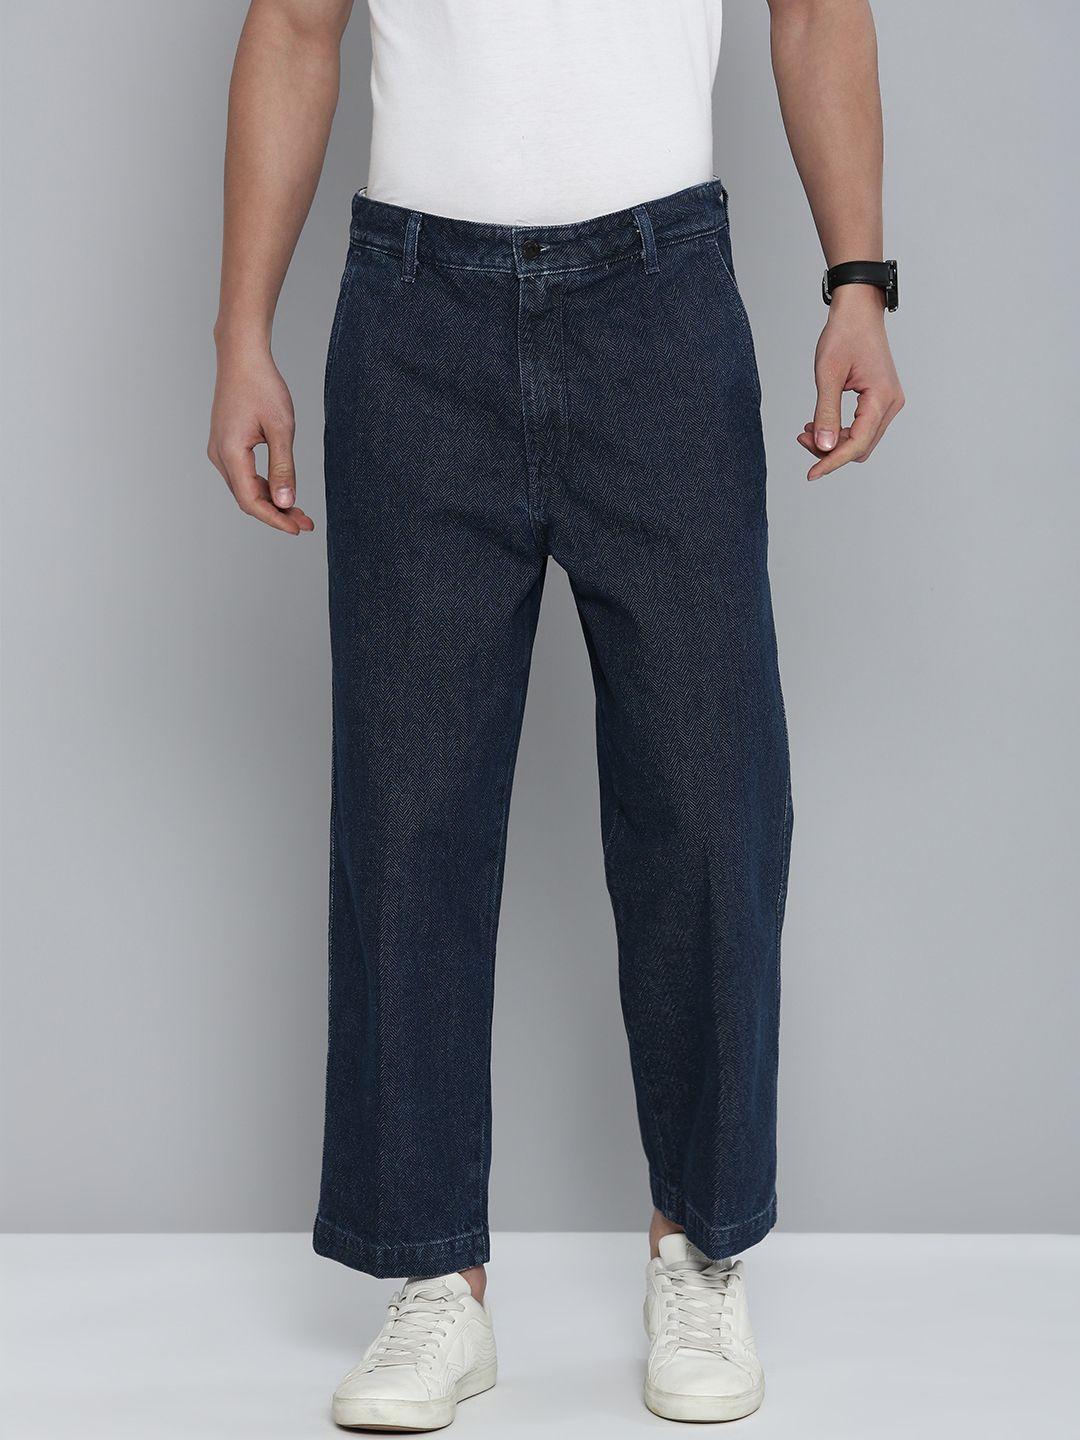 levis-men-straight-fit-chinos-trousers